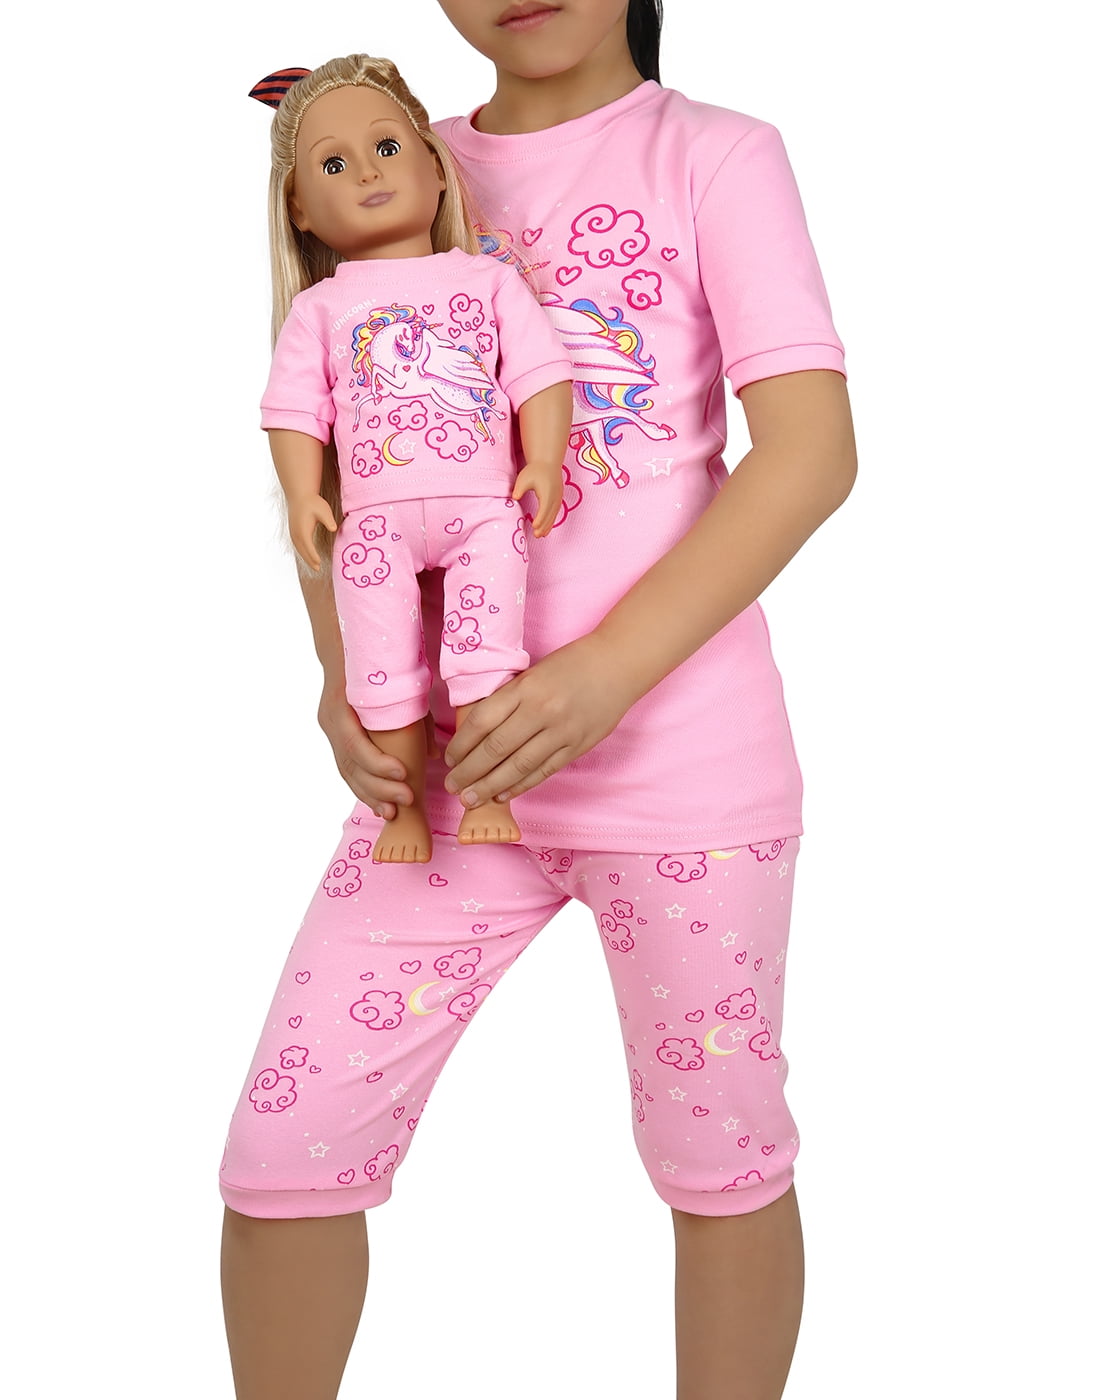 HDE Girls Pajamas - Pajama Set with for Girl with Matching Doll Outfit -  100% Cotton, Breathable Kids PJ Sets with Cute Unicorn Design - Doll Pyjamas  Fit American Girl & 18 Dolls 